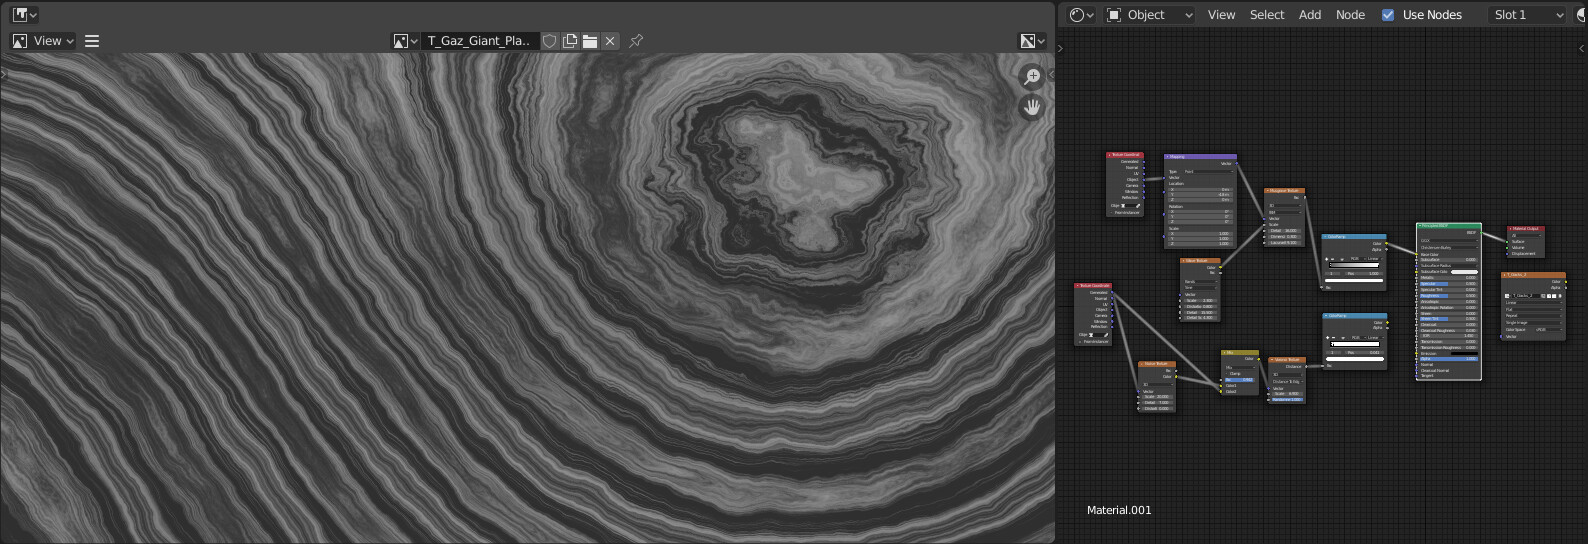 Texture Generator programmed in Blender for Texture Baking. Generates different Gas Giant textures and cracks.